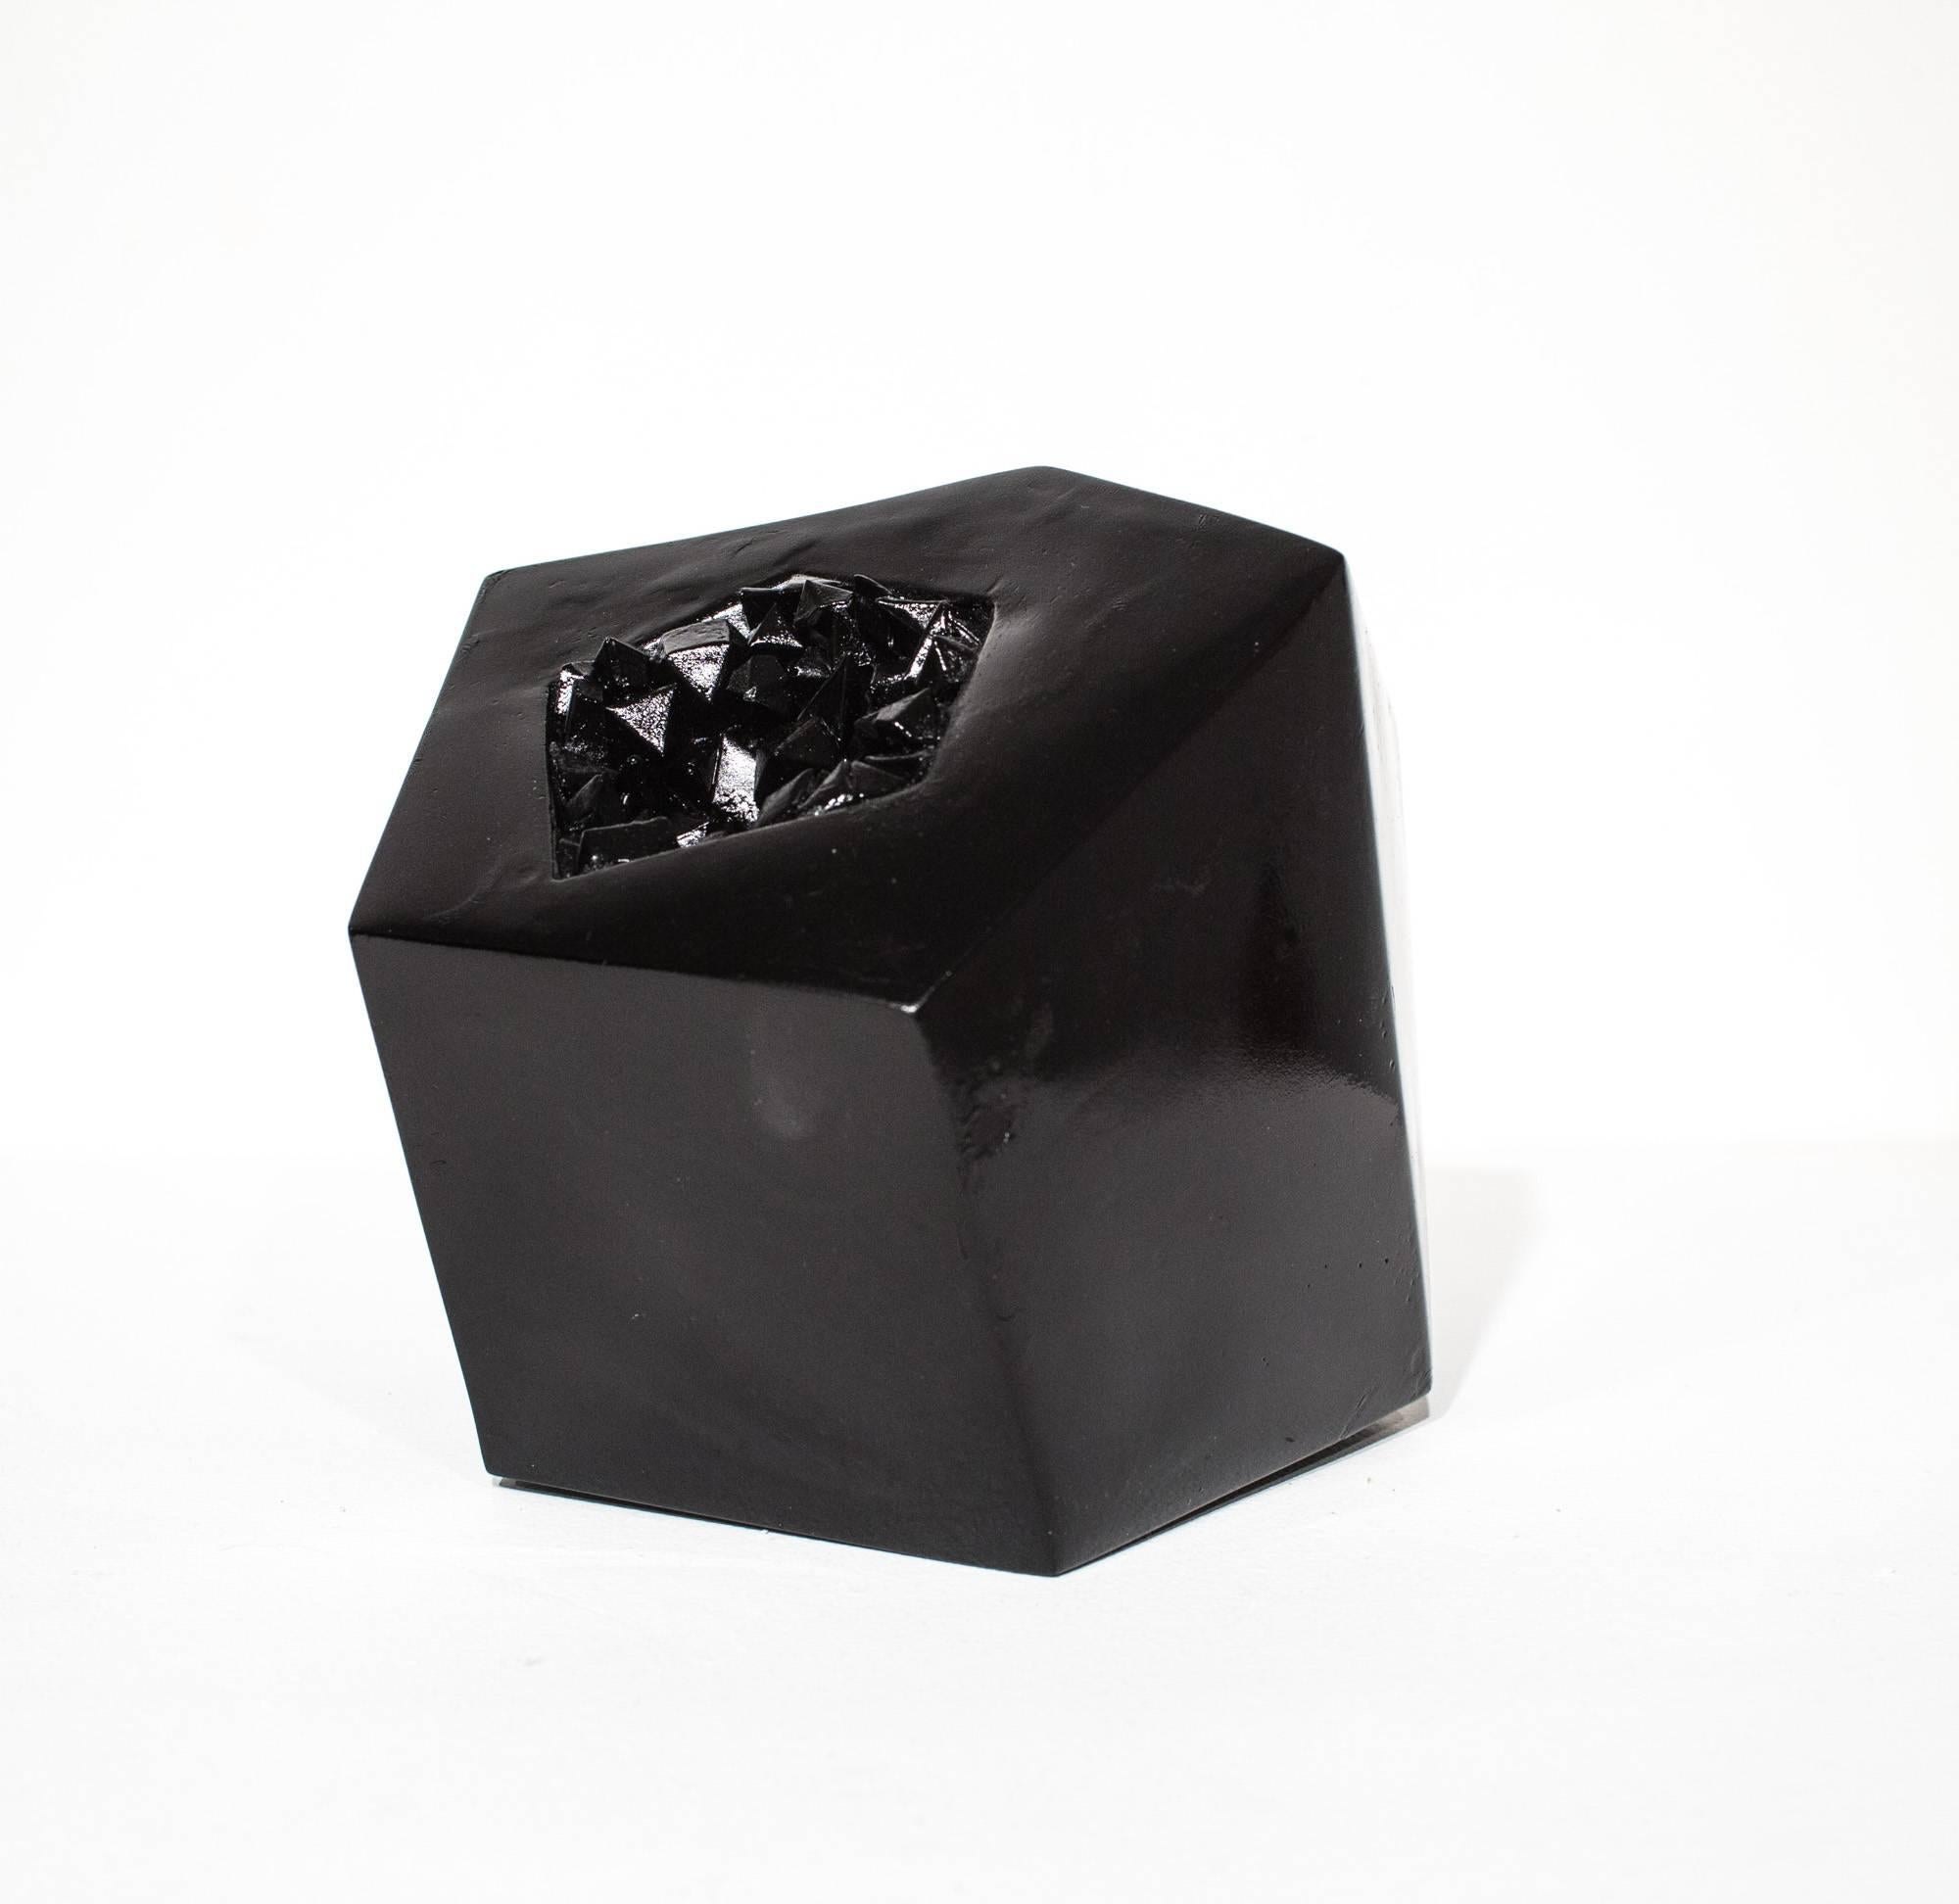 Paige Smith (A Common Name) Abstract Sculpture - "Obsidian Geode" Geological sculpture, Silicone and Resin